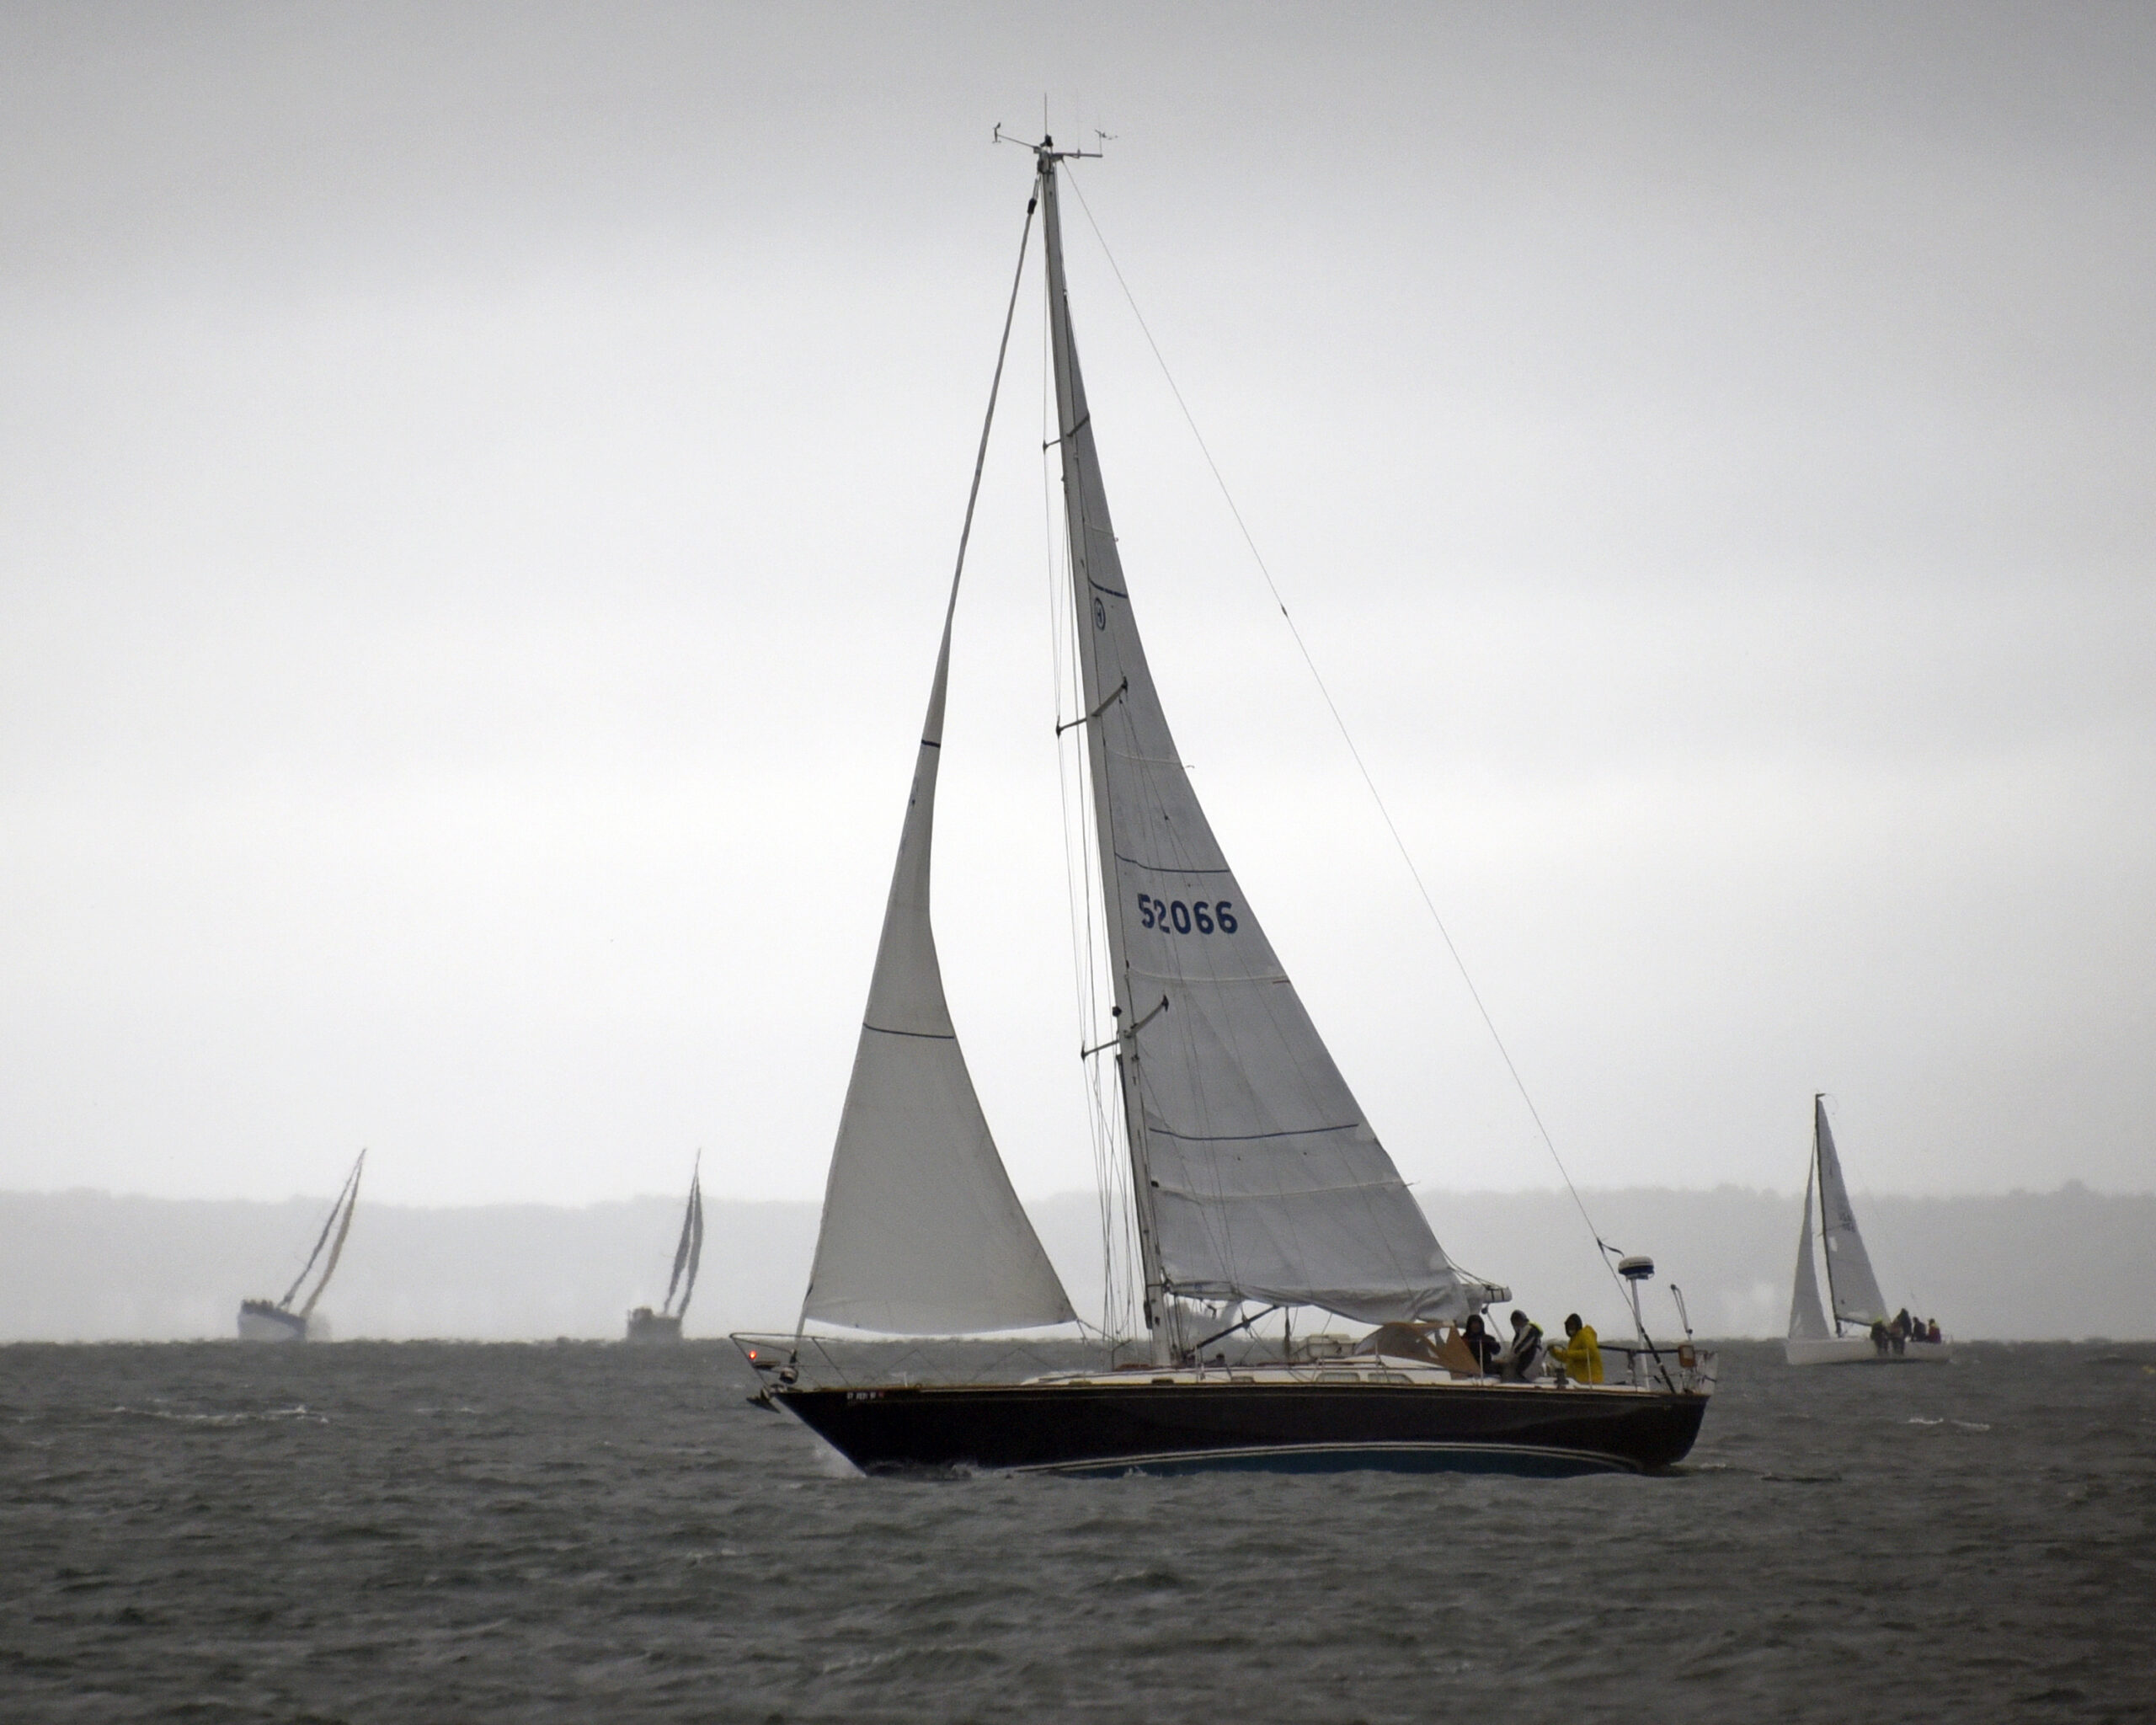 Third place in non-spinnaker, Jacqueline IV, reefed going to weather.  MICHAEL MELLA